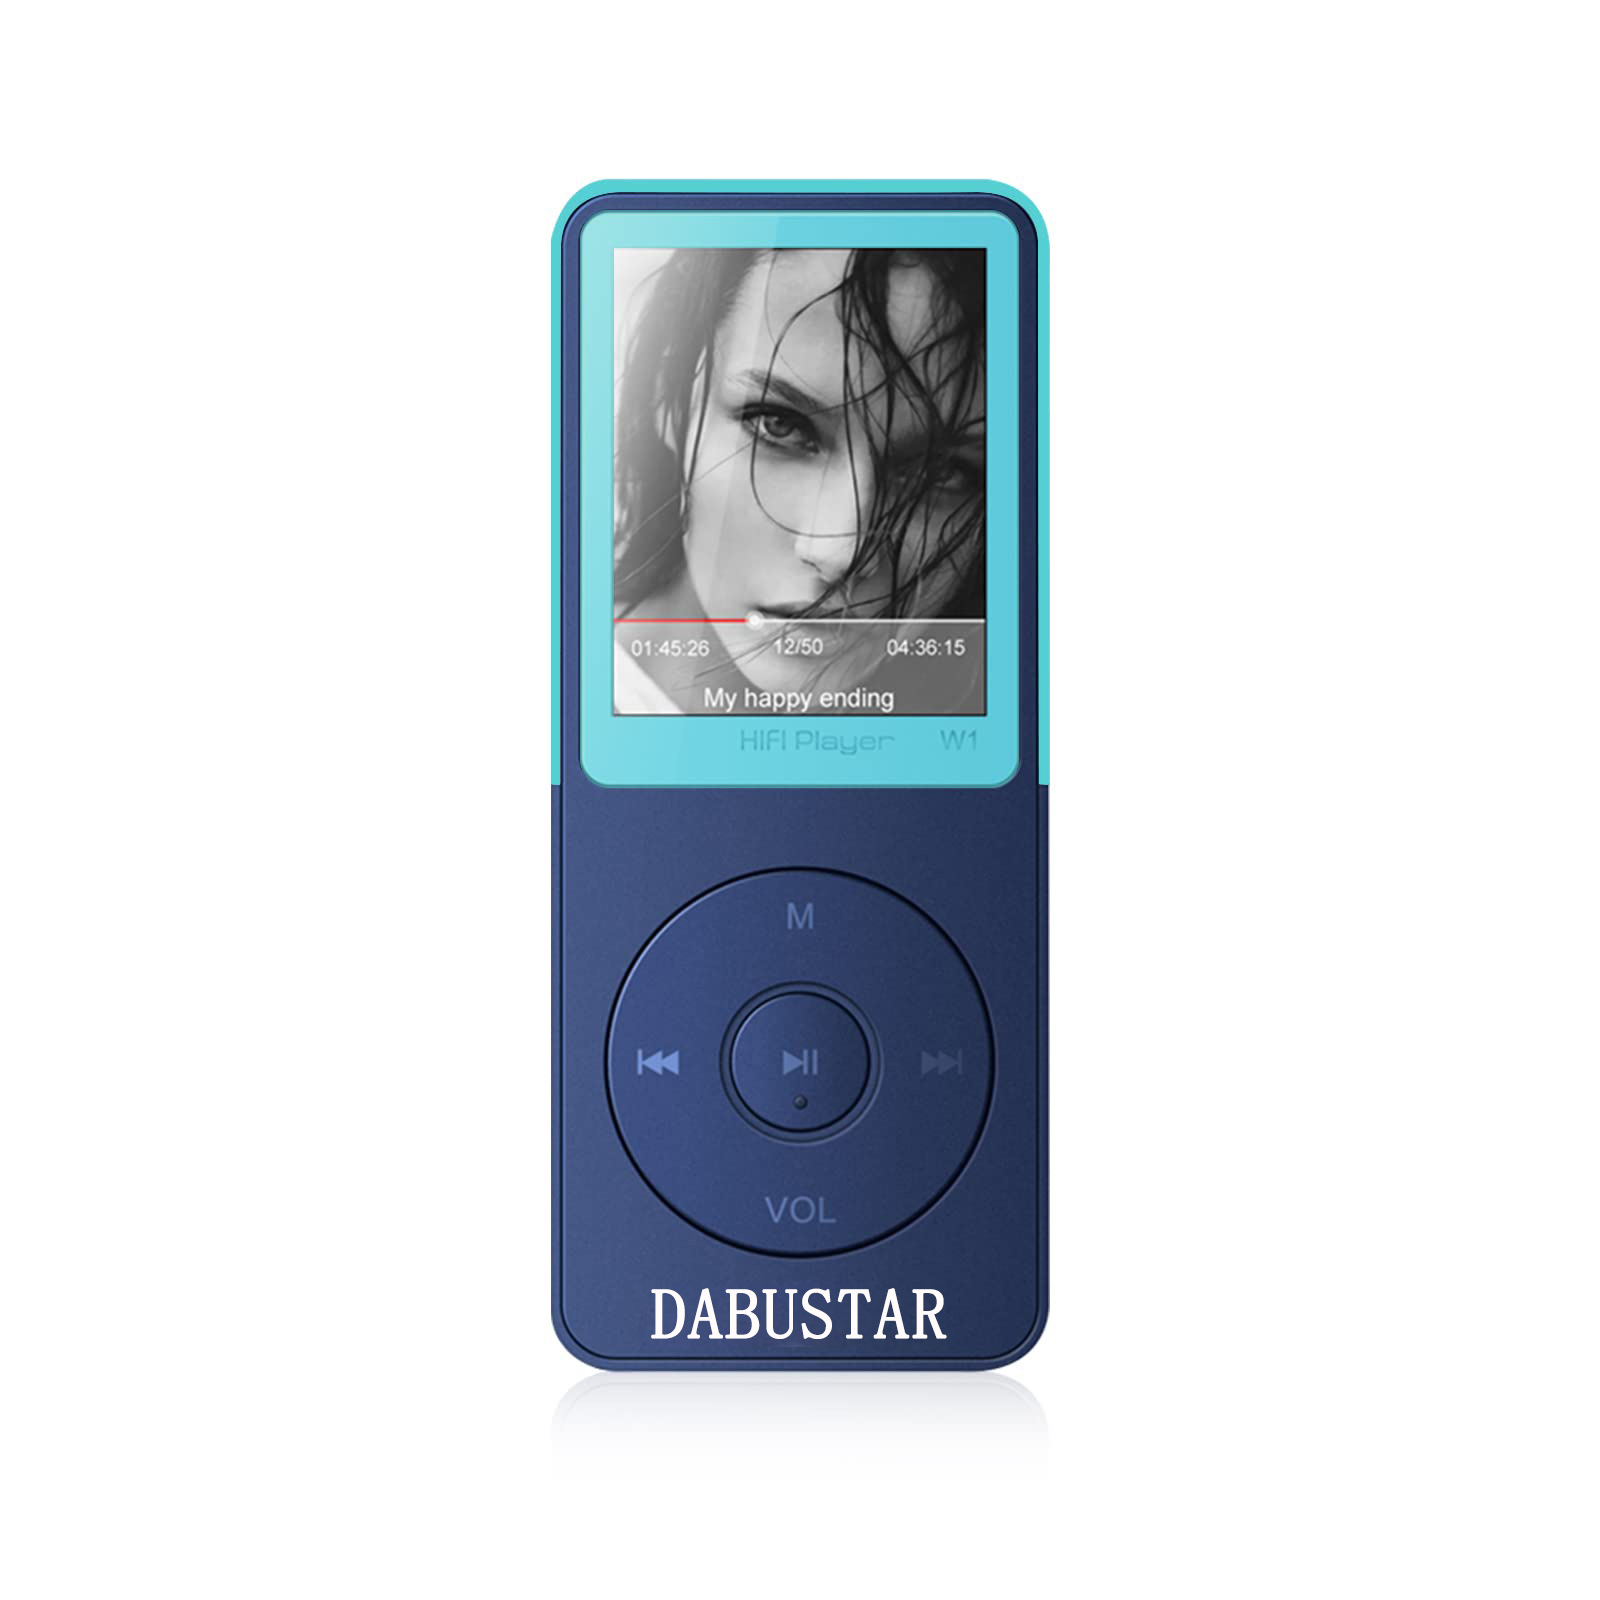 DABUSTAR Portable media players 72GB WiFi Mp3 Player with Bluetooth, TIMMKOO 4.0" Full Touch Screen Mp3 Mp4 Player with Speaker, Portable HiFi Digital Music Player with FM Radio,Recorder, Ebook,Clock, Browse